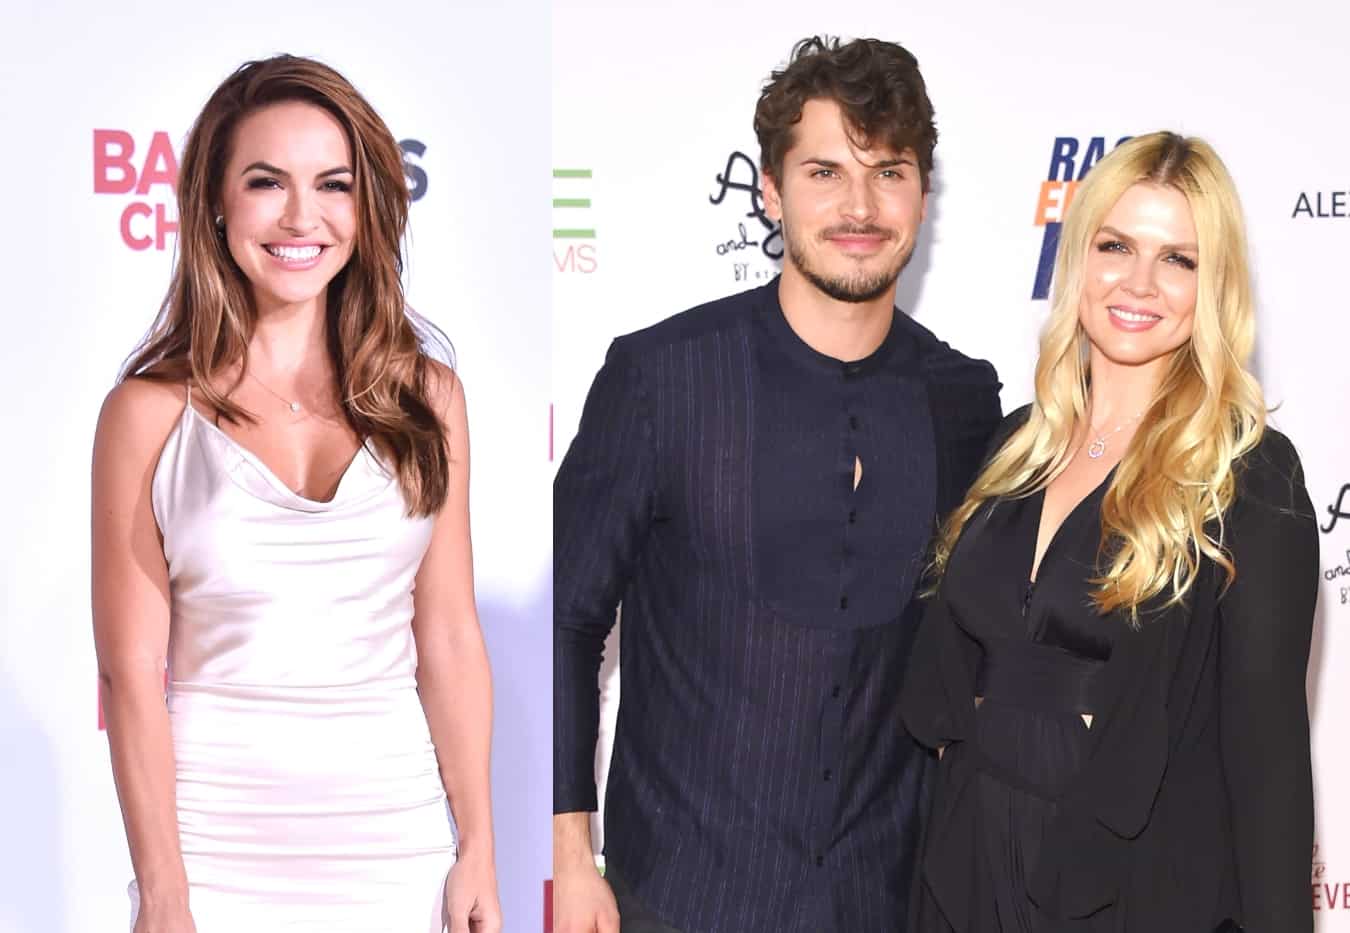 Selling Sunset's Chrishell Stause Denies Affair With DWTS Partner Gleb Savchenko After His Wife Elena Accuses Him of a "Recent Inappropriate Relationship"